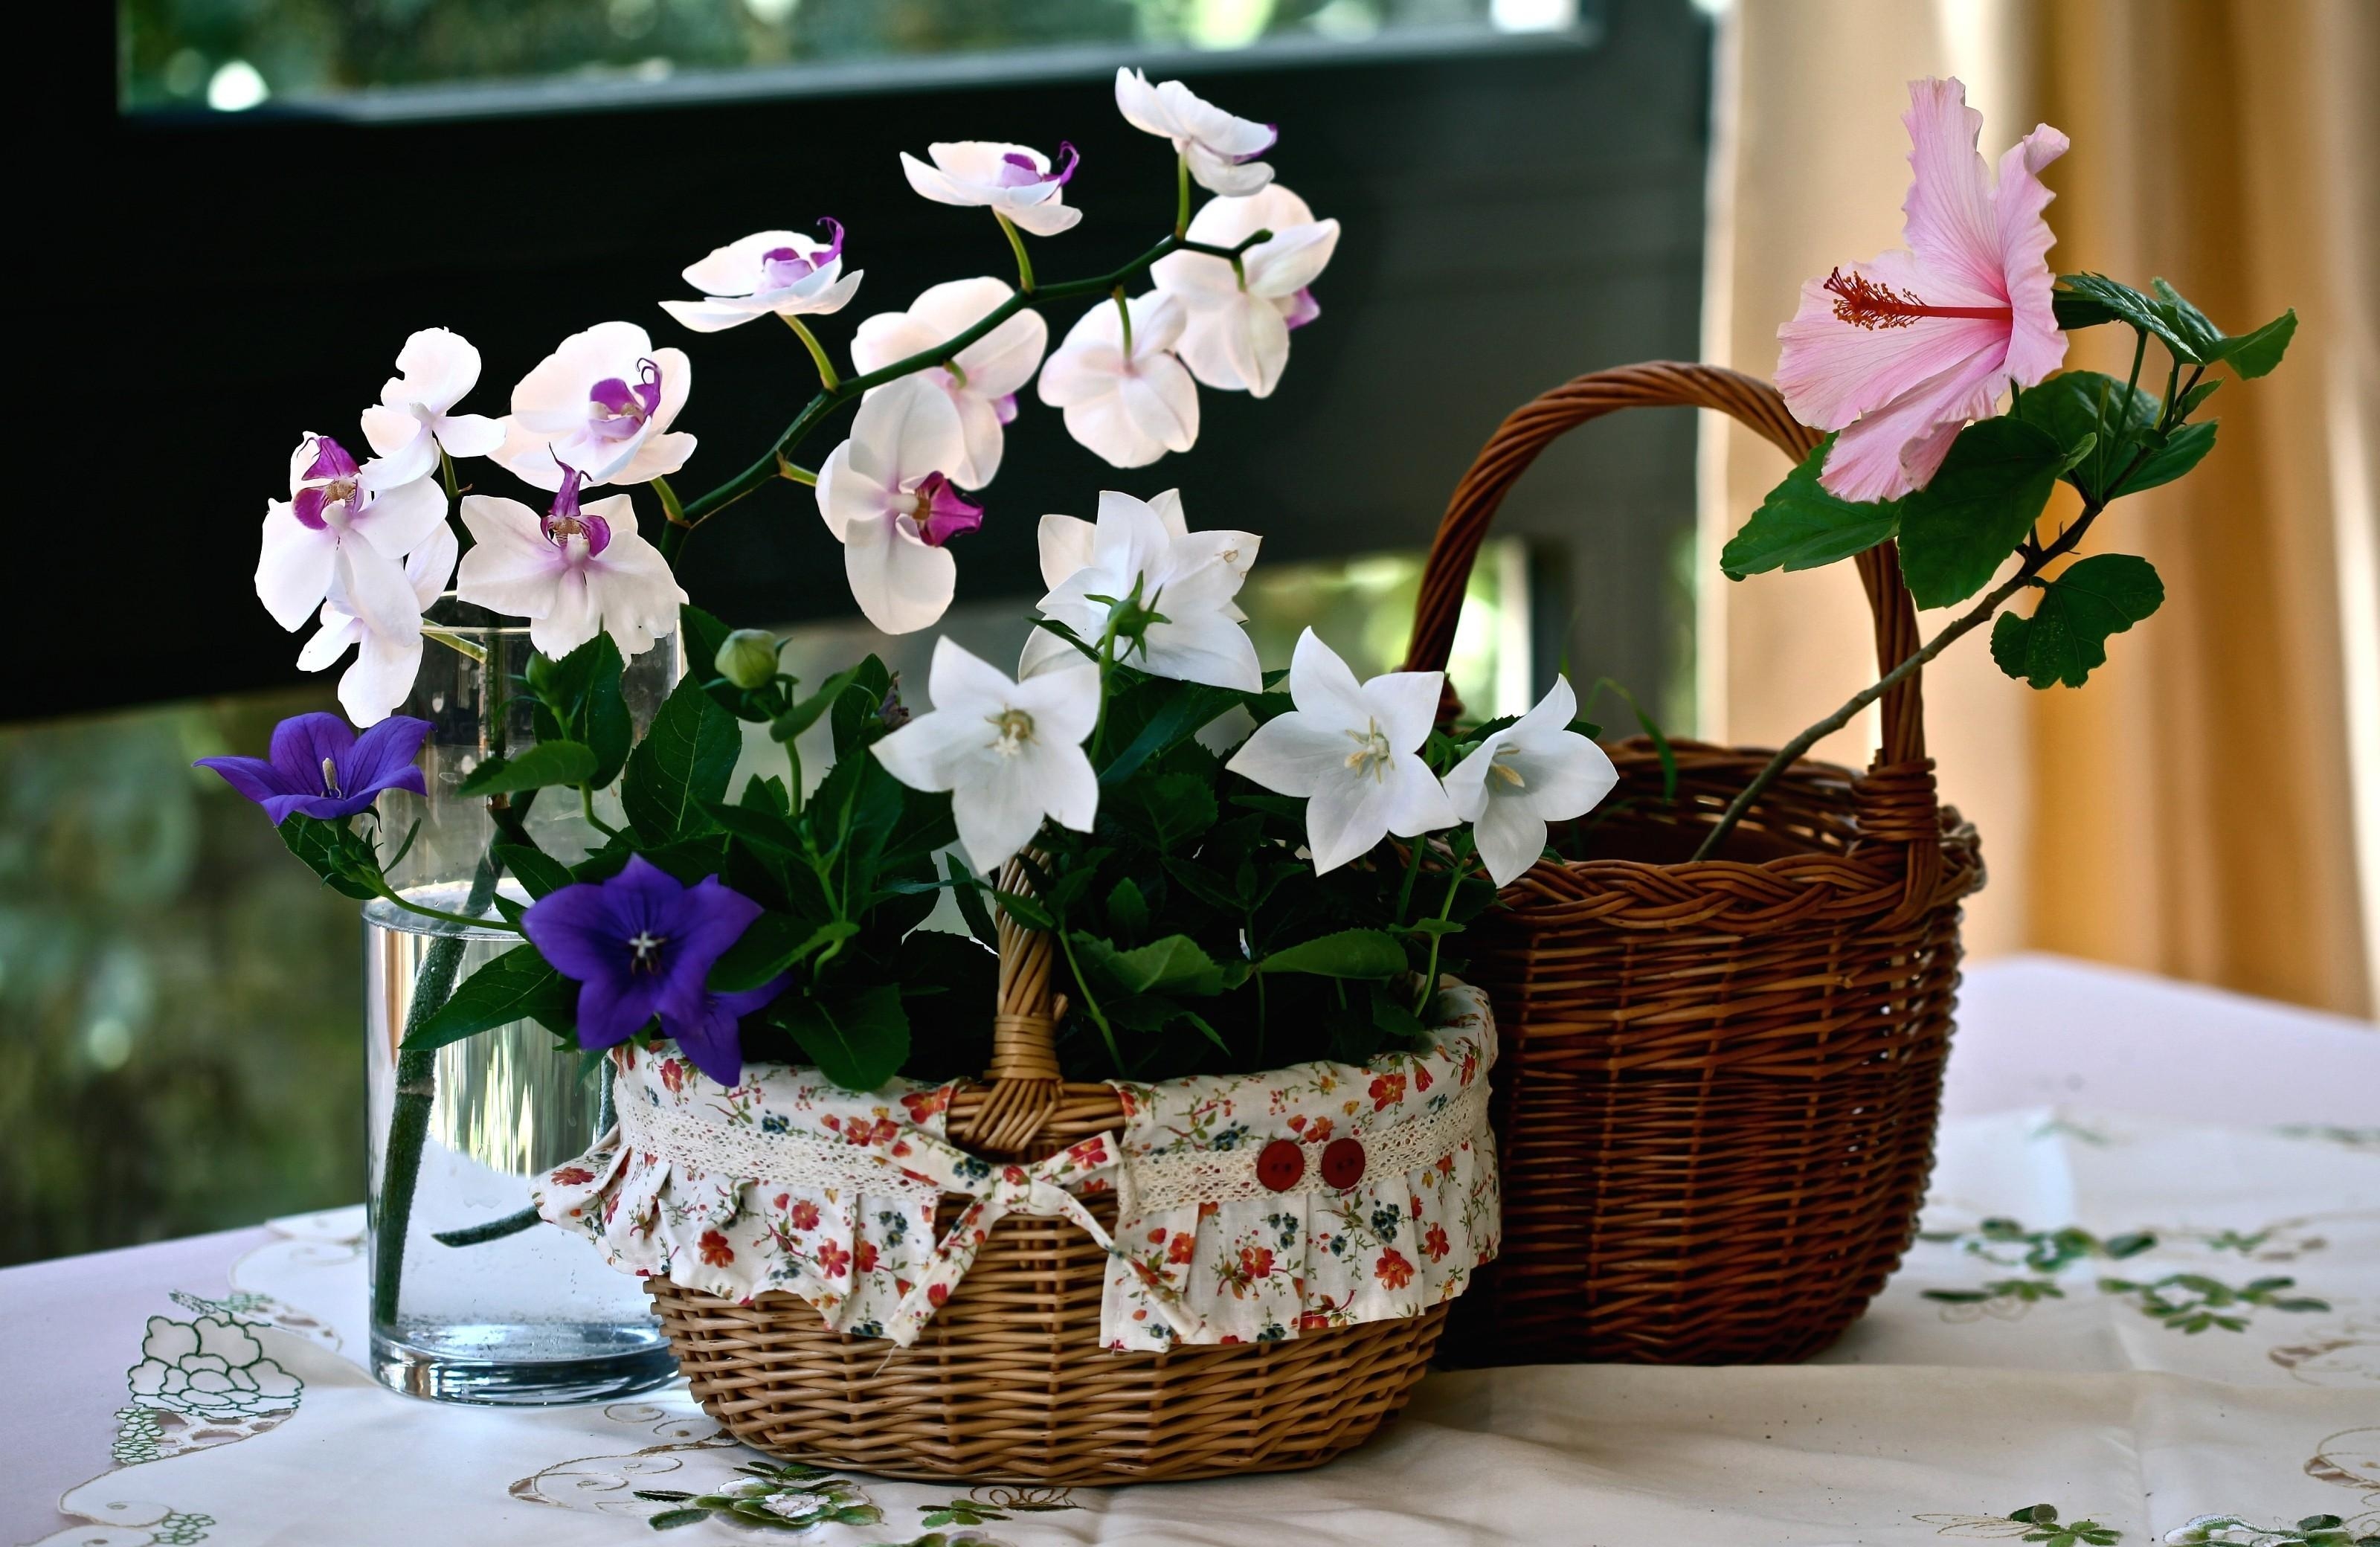 flowers, bluebells, glass, basket, hibiscus, orchid, baskets, tablecloth